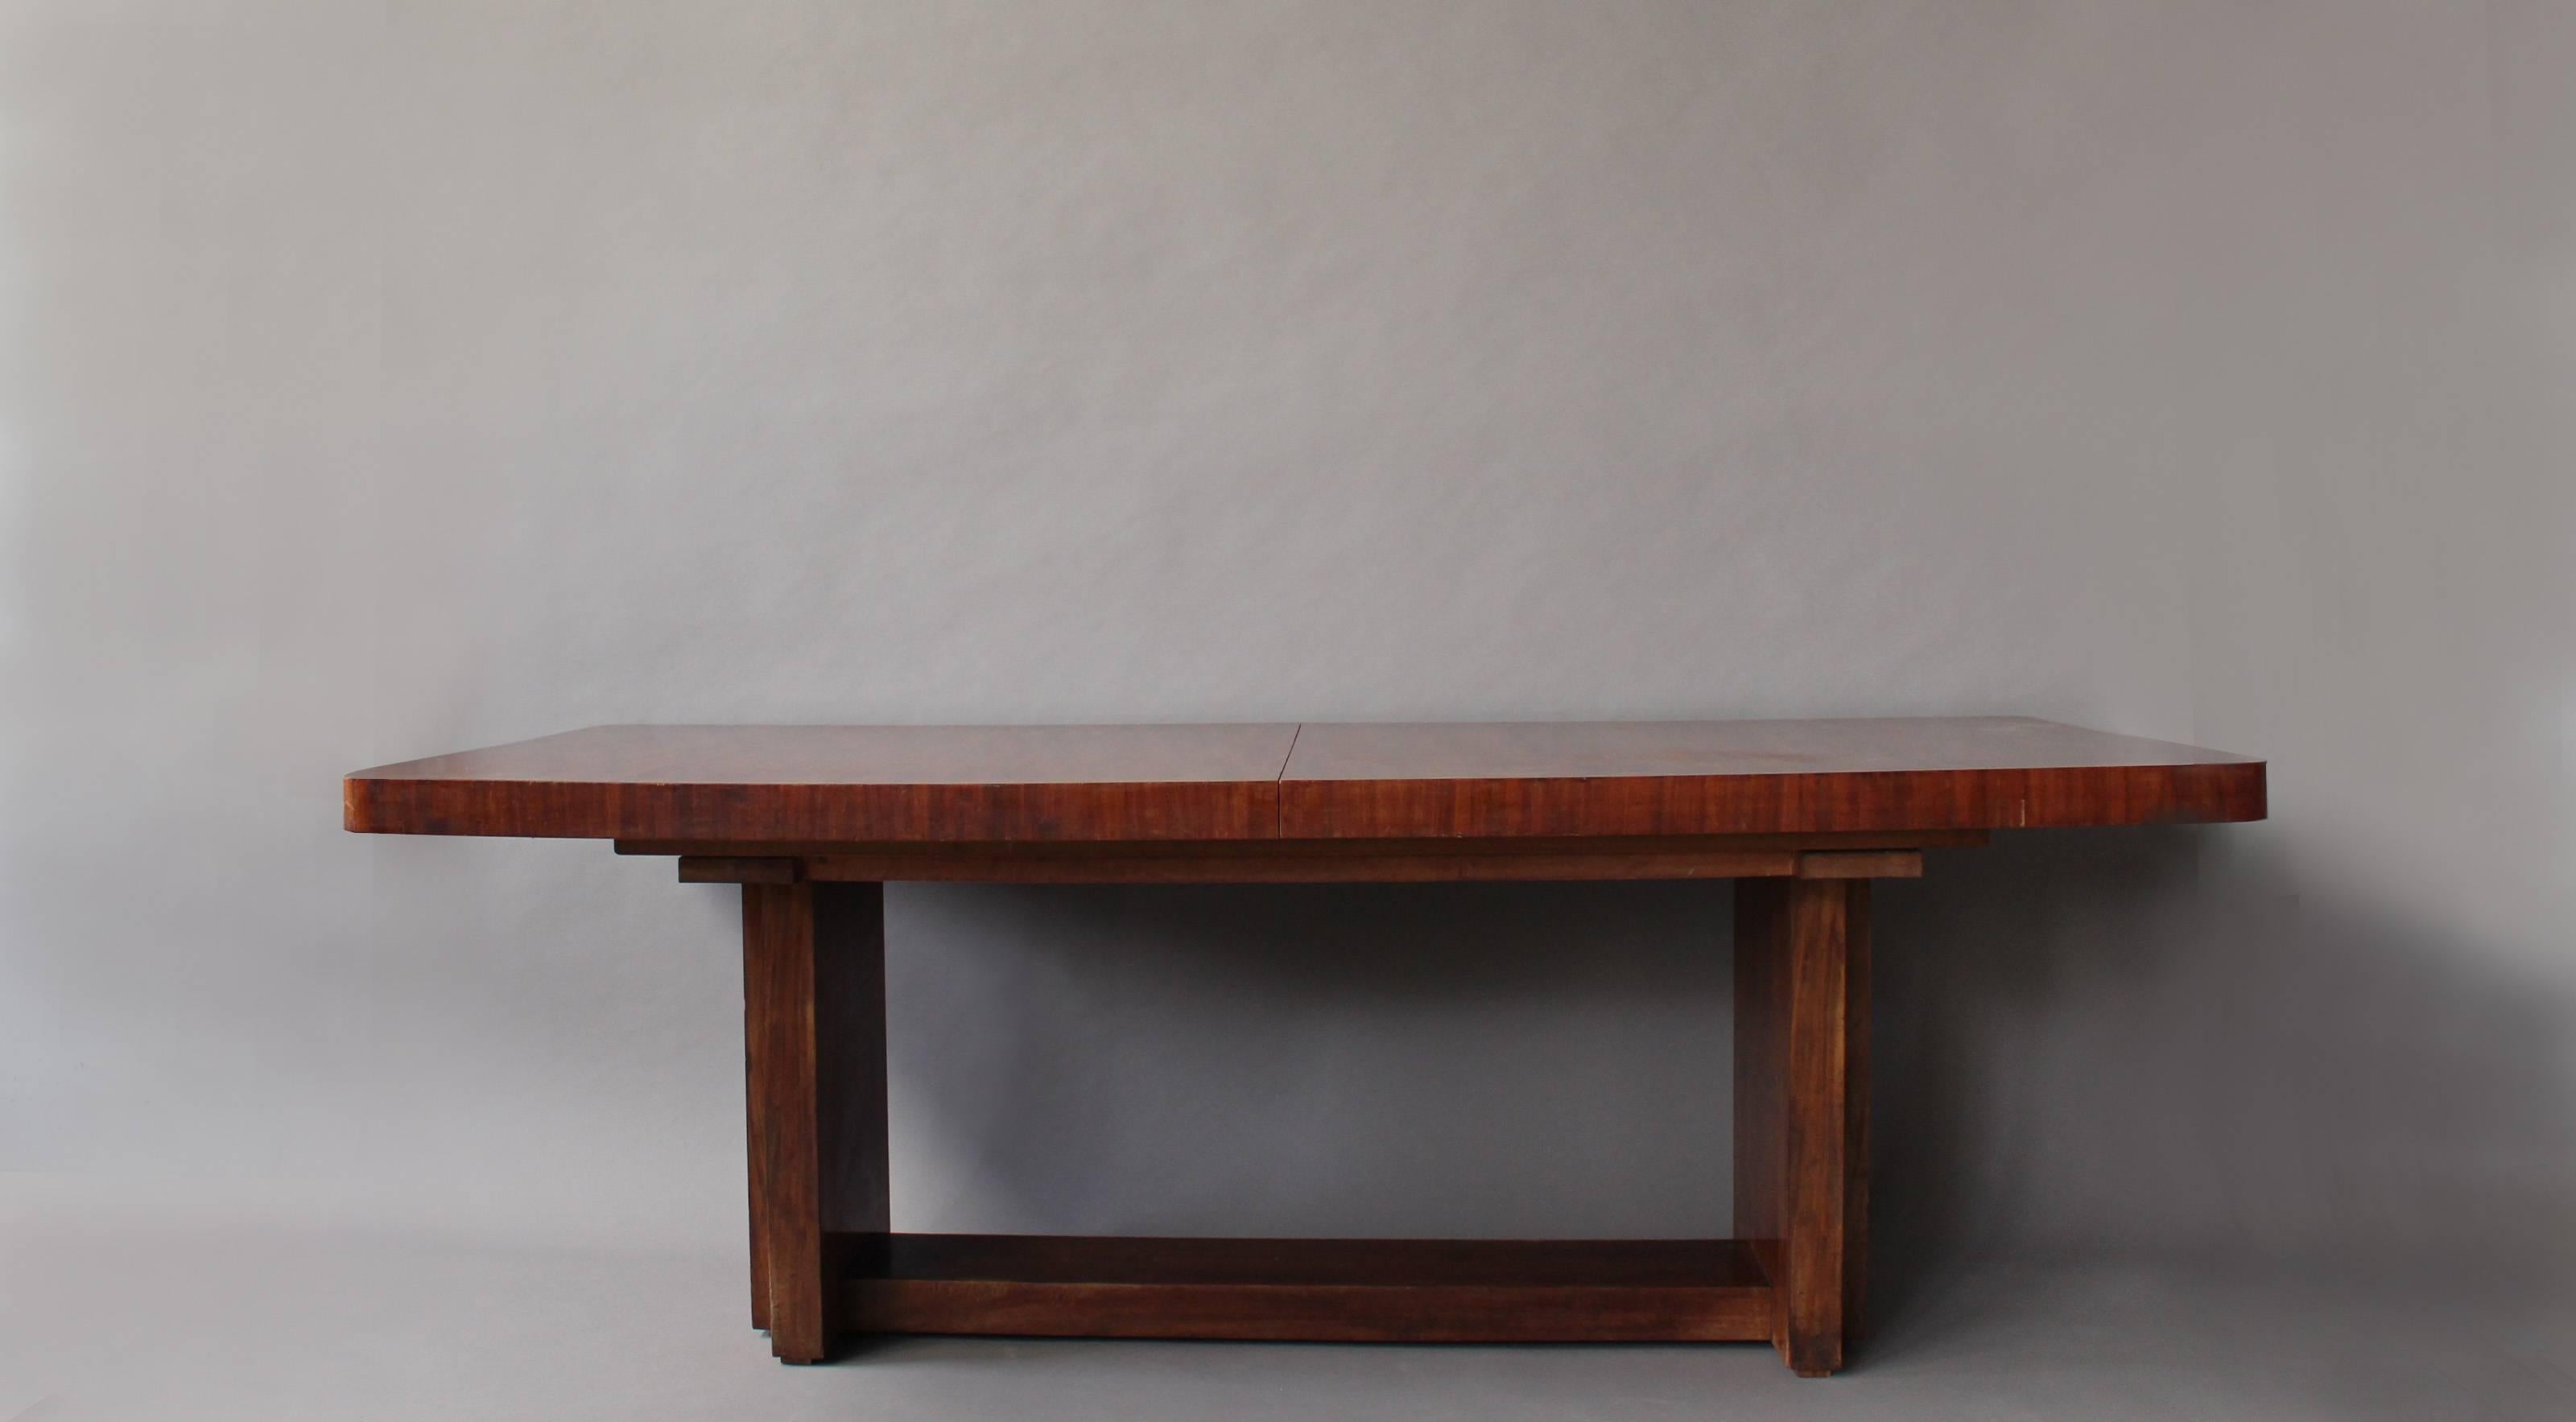 A Fine French Art Deco extendable mahogany modernist dining table.
Possibility of center extension leaves (they are missing).
